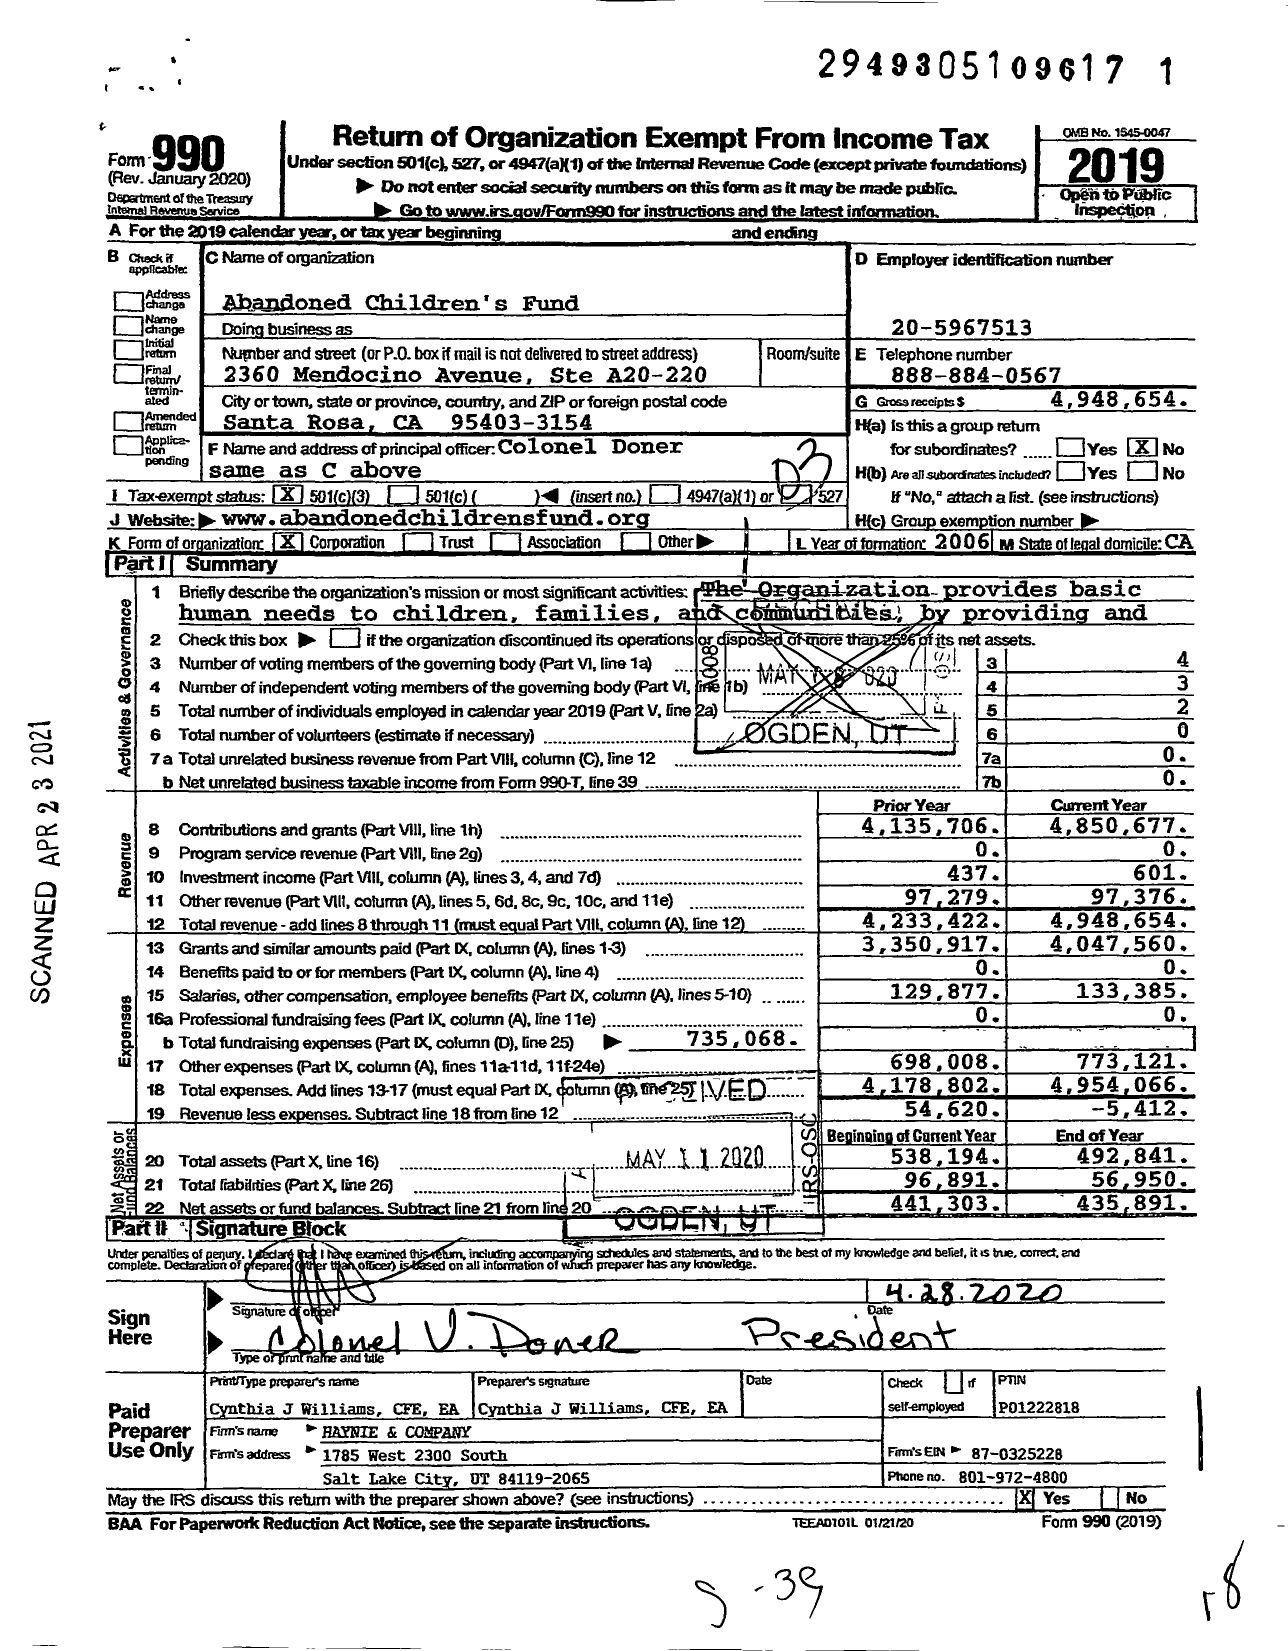 Image of first page of 2019 Form 990 for Abandoned Childrens Fund